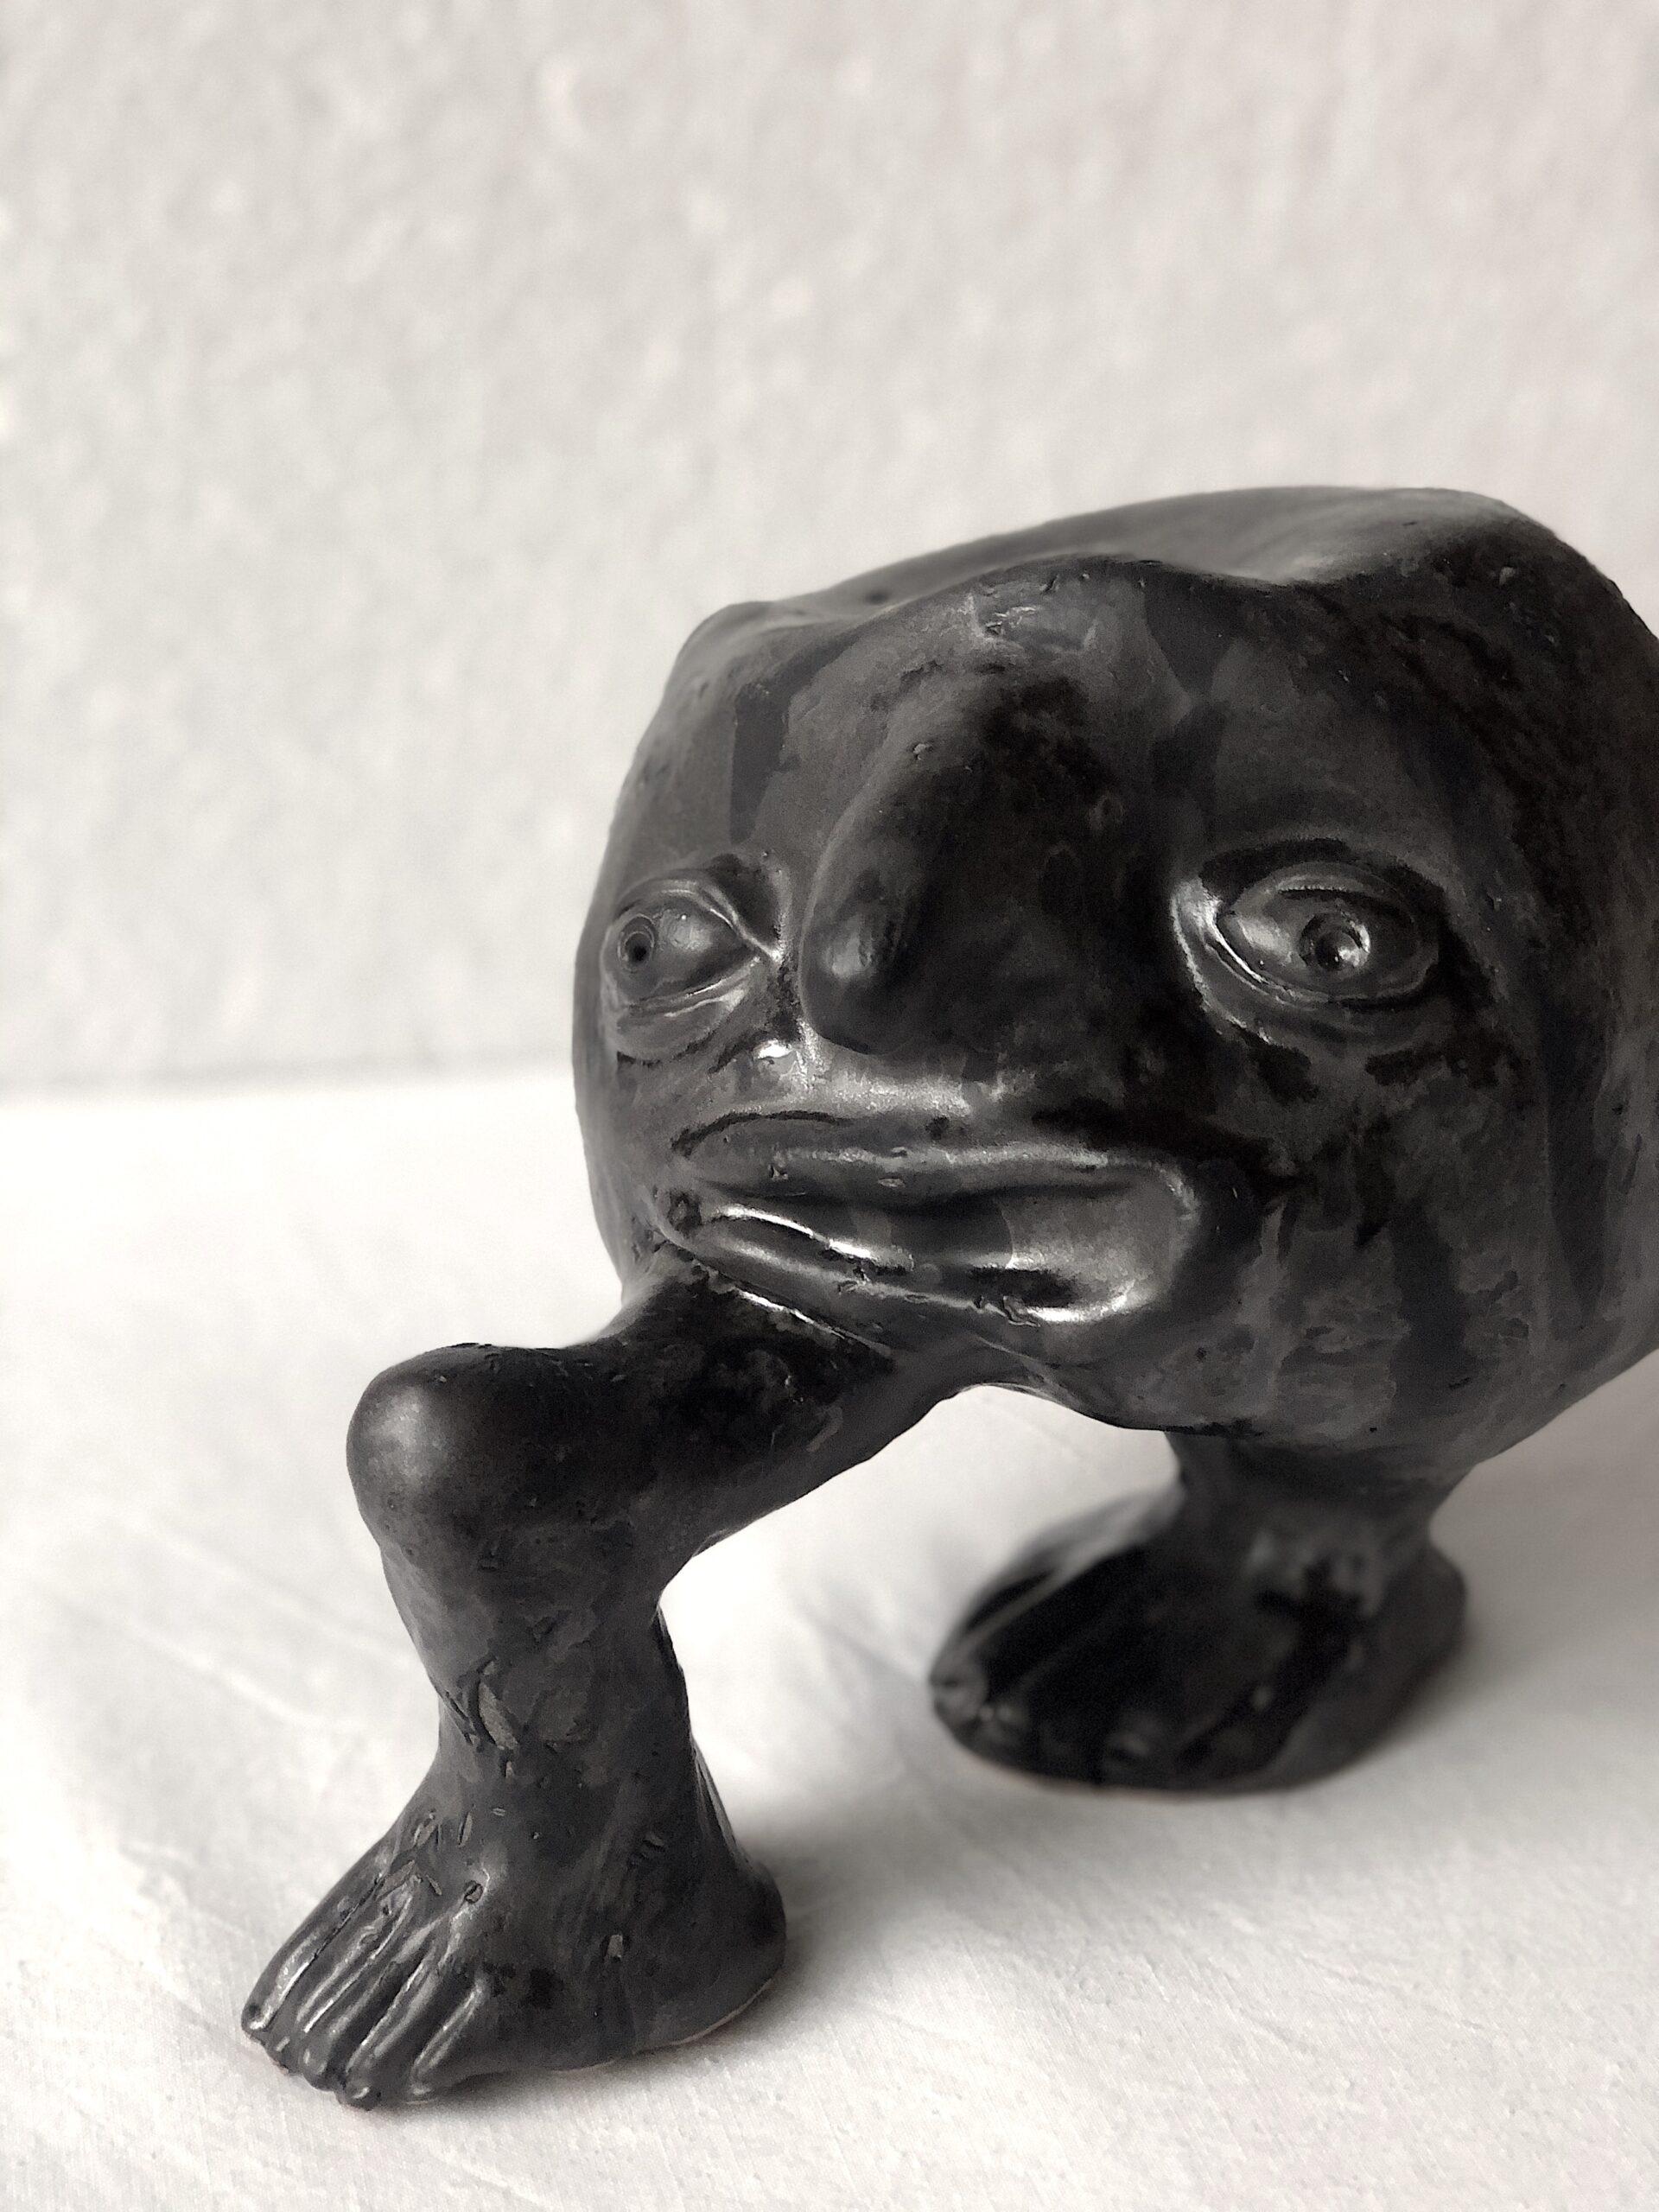 A family of monsters, this fascinating collection of total black sculptures is created in collaboration with the greatest apulian masters of ceramics, the colì brothers. The works are inspired by medieval bestiaries, in a history prior to that of